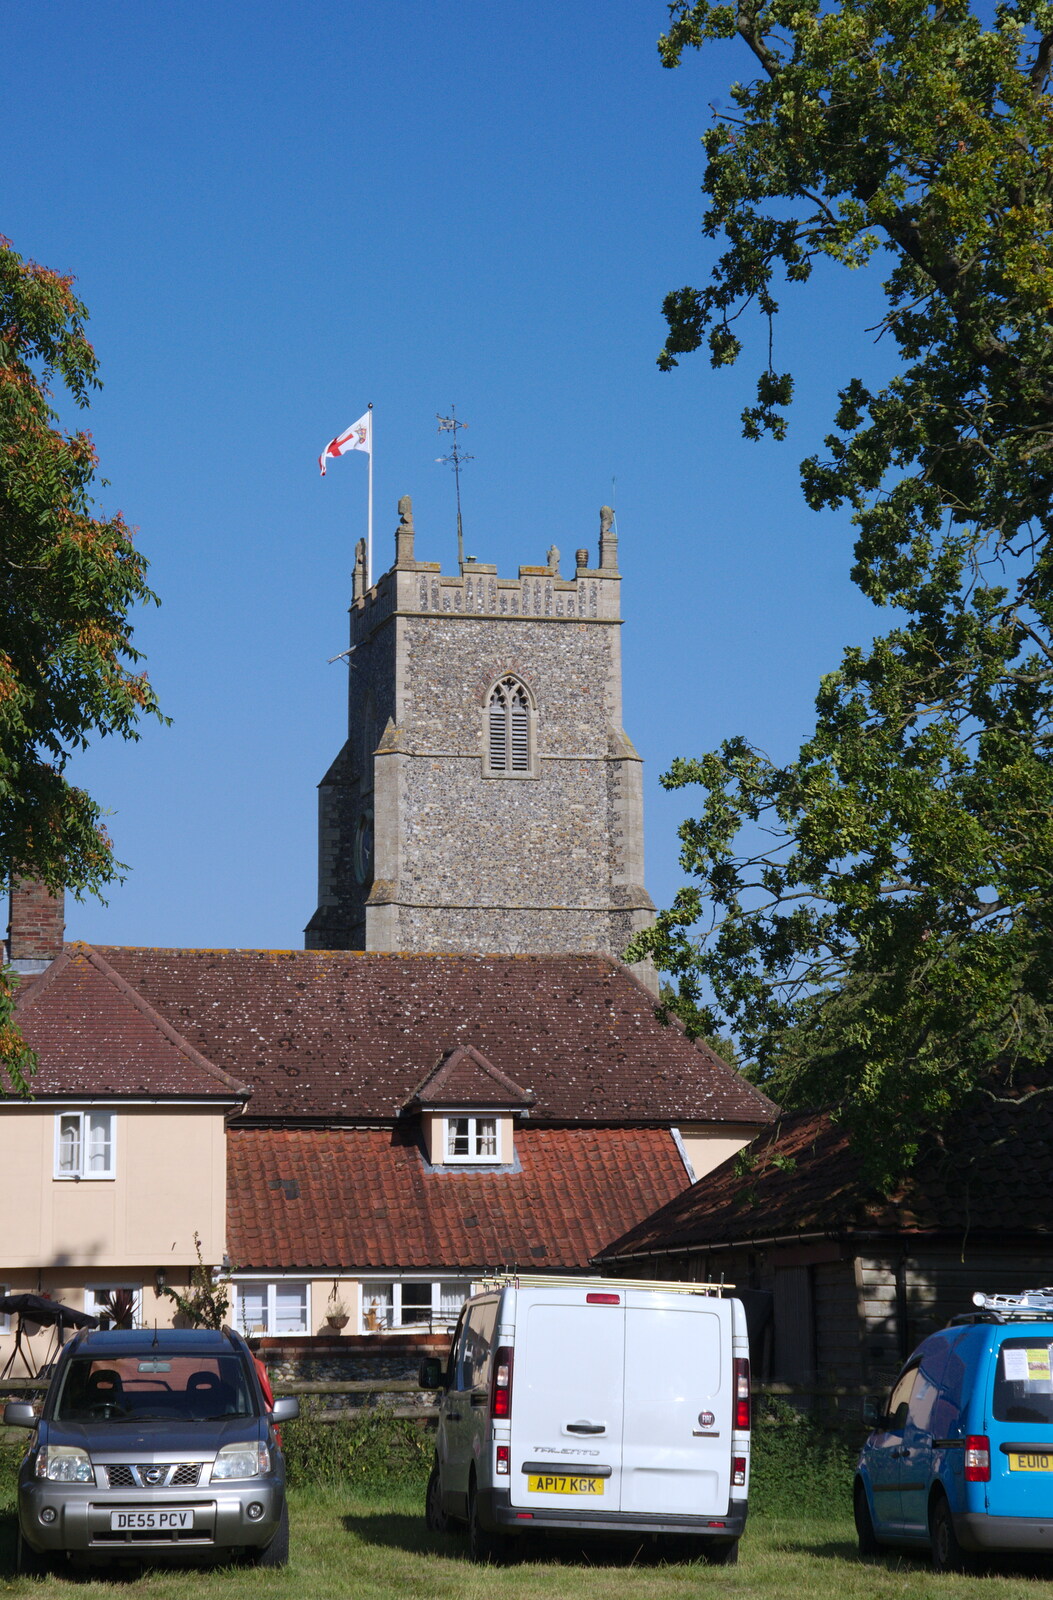 A view of St. Mary's Church from The Gislingham Silver Band at Walsham Le Willows, Suffolk - 26th August 2019